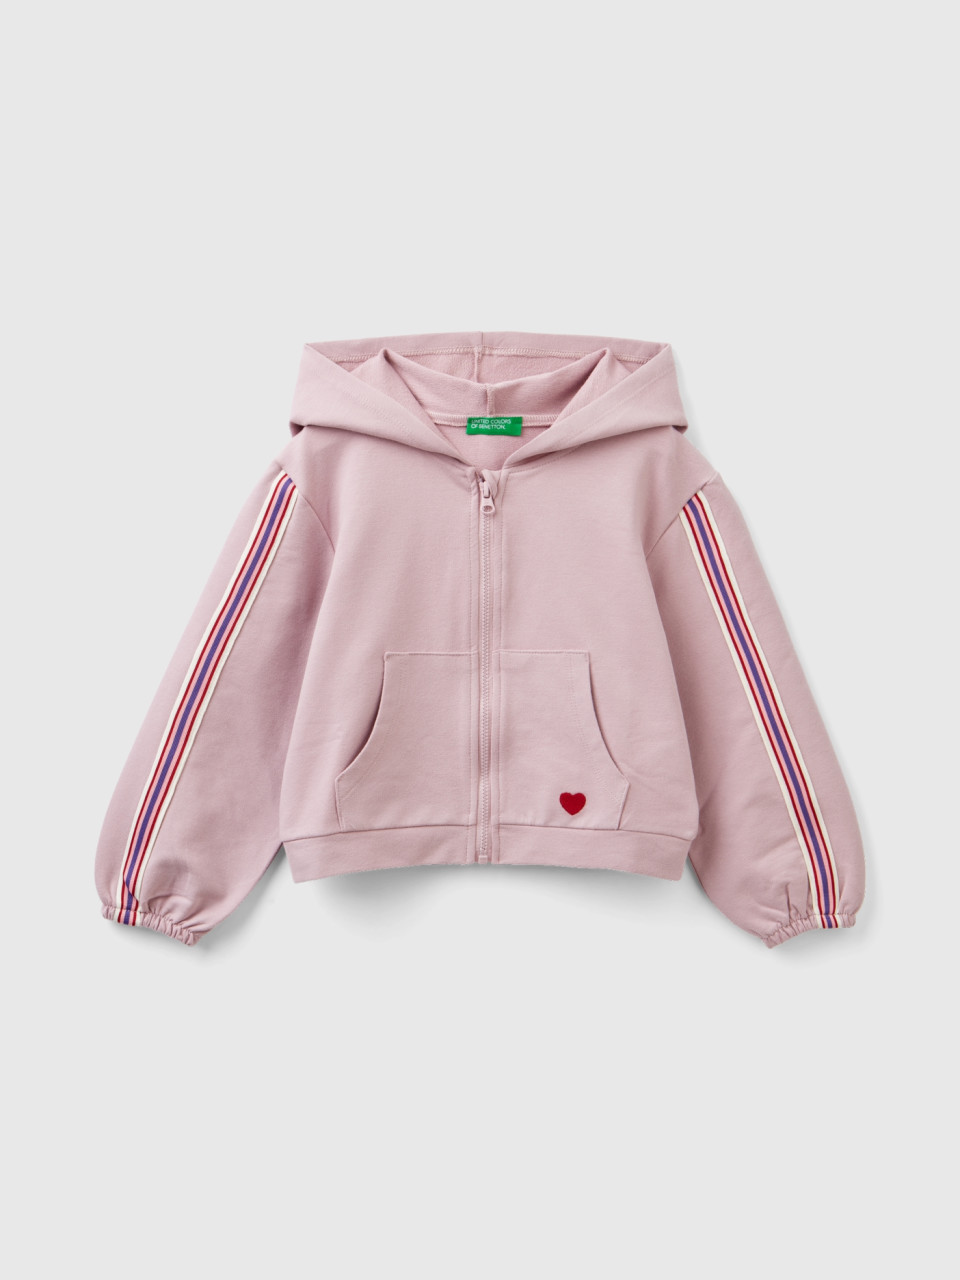 Benetton, Cropped Sweatshirt With Striped Details, Pink, Kids